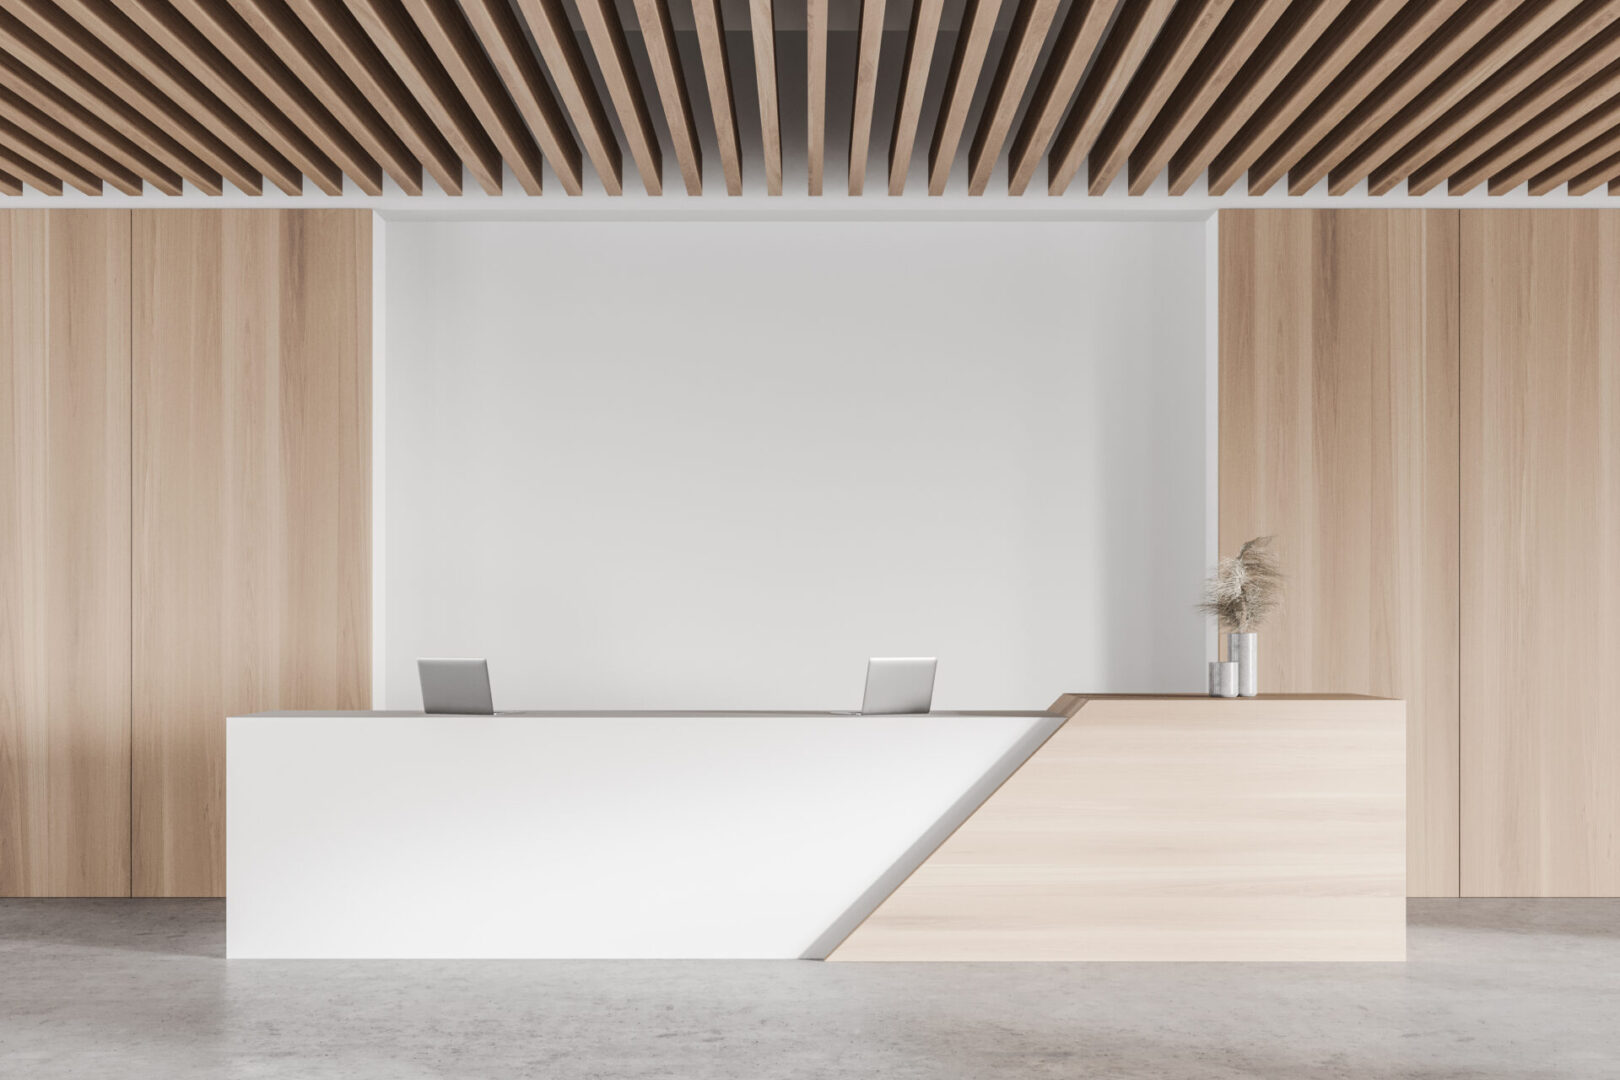 A white room with wooden ceiling and floor.